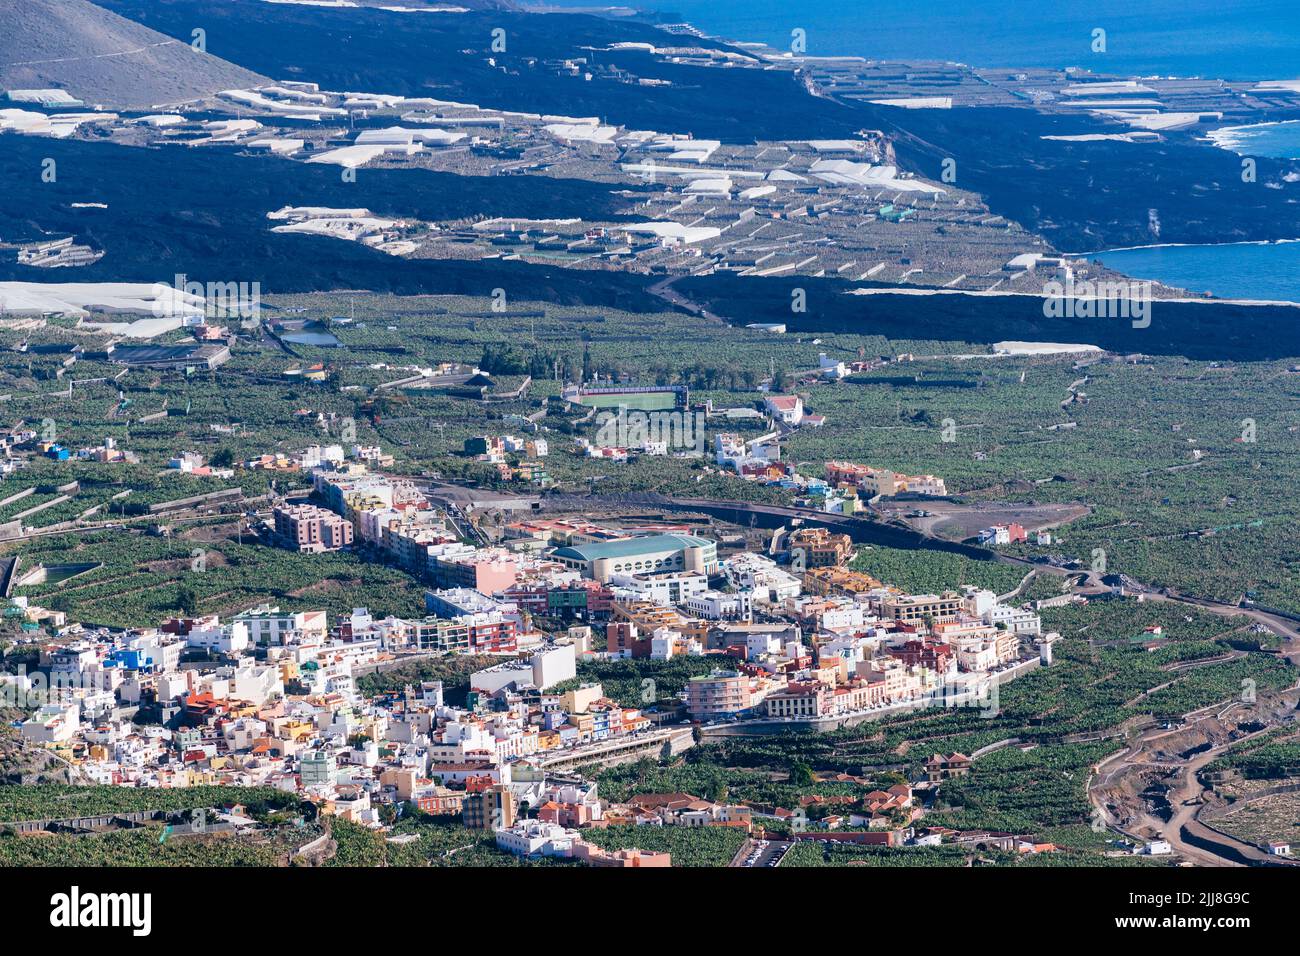 The town of Tazacorte surrounded by banana plantations. Behind the river of solidified lava that crosses the Aridane valley. La Palma, Canary Islands, Stock Photo